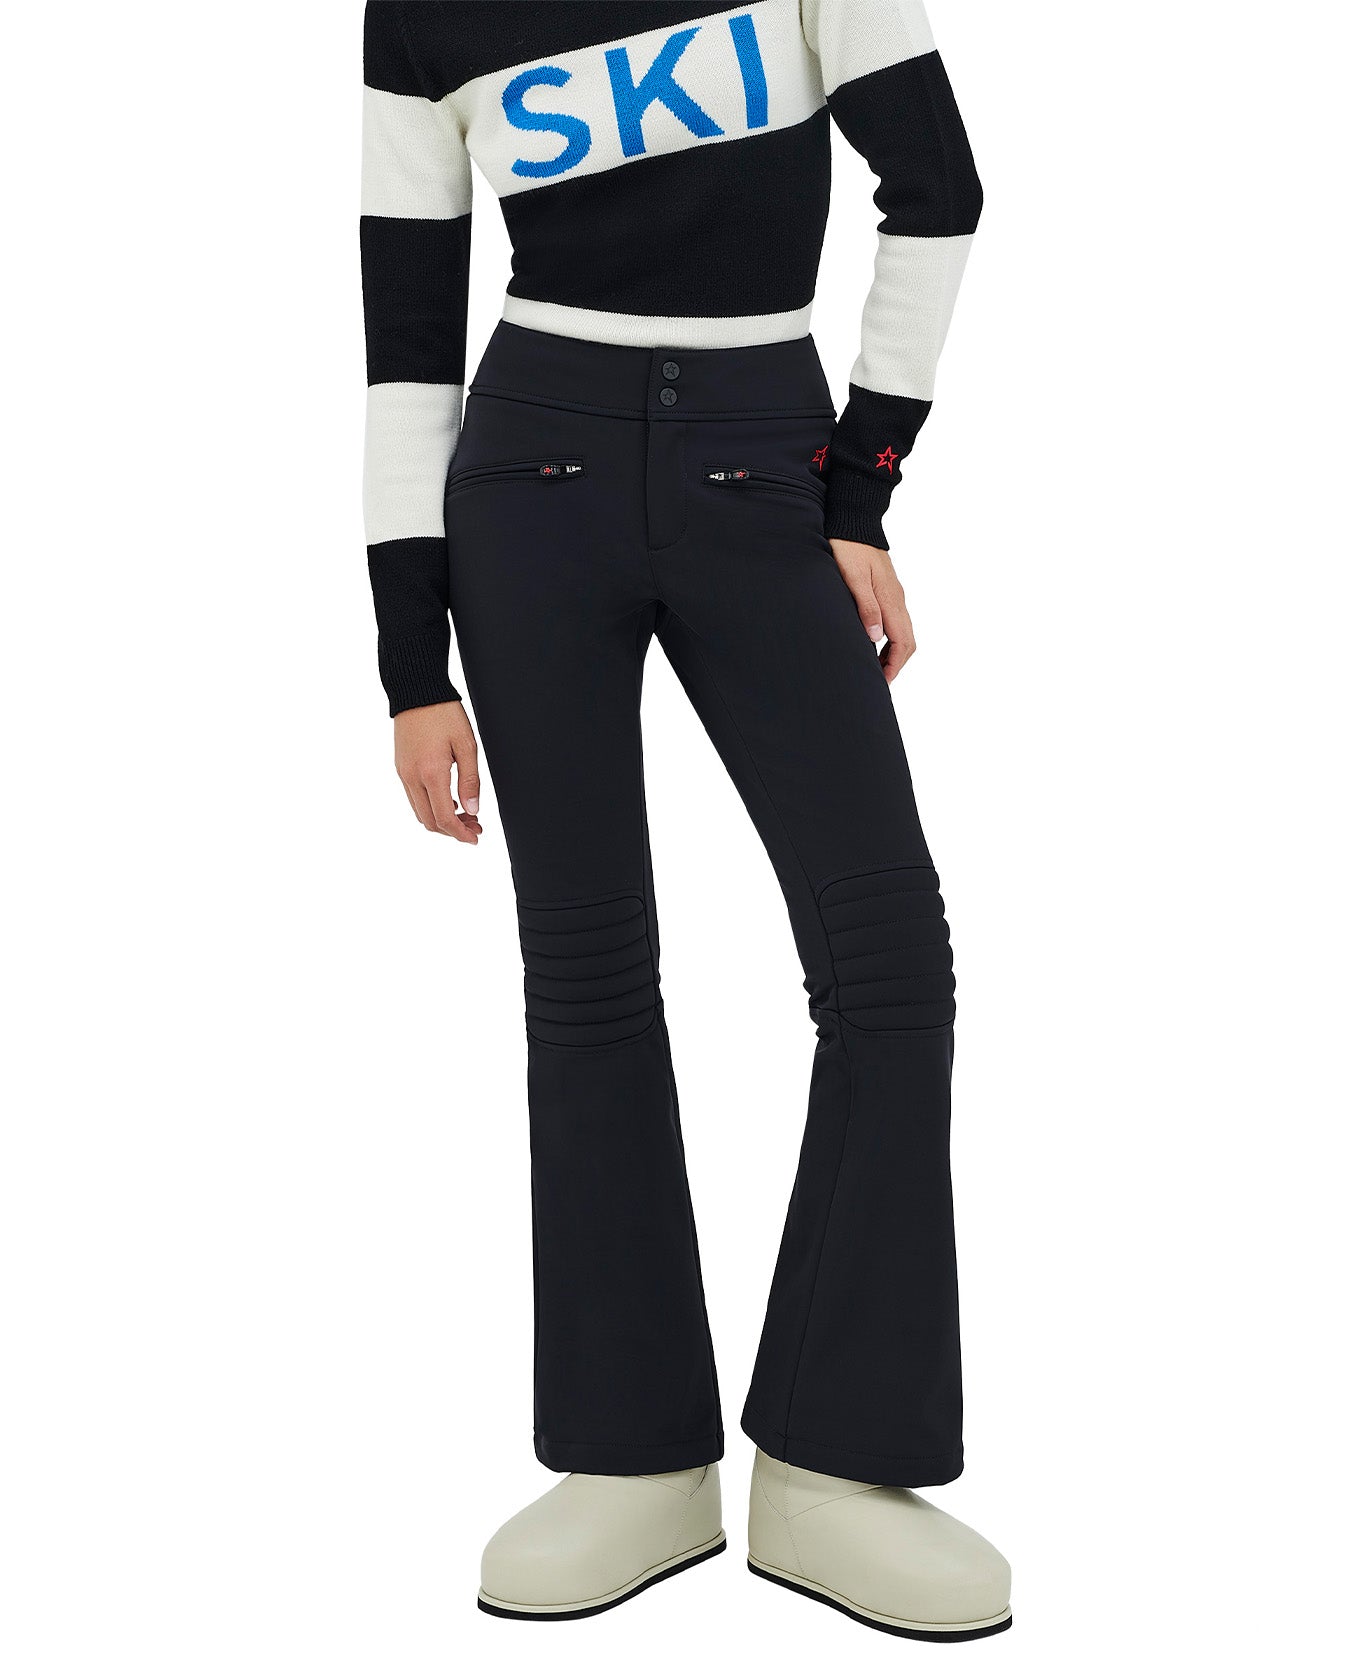 Perfect Moment Aurora High Waist Flare Pant - Women's - Clothing